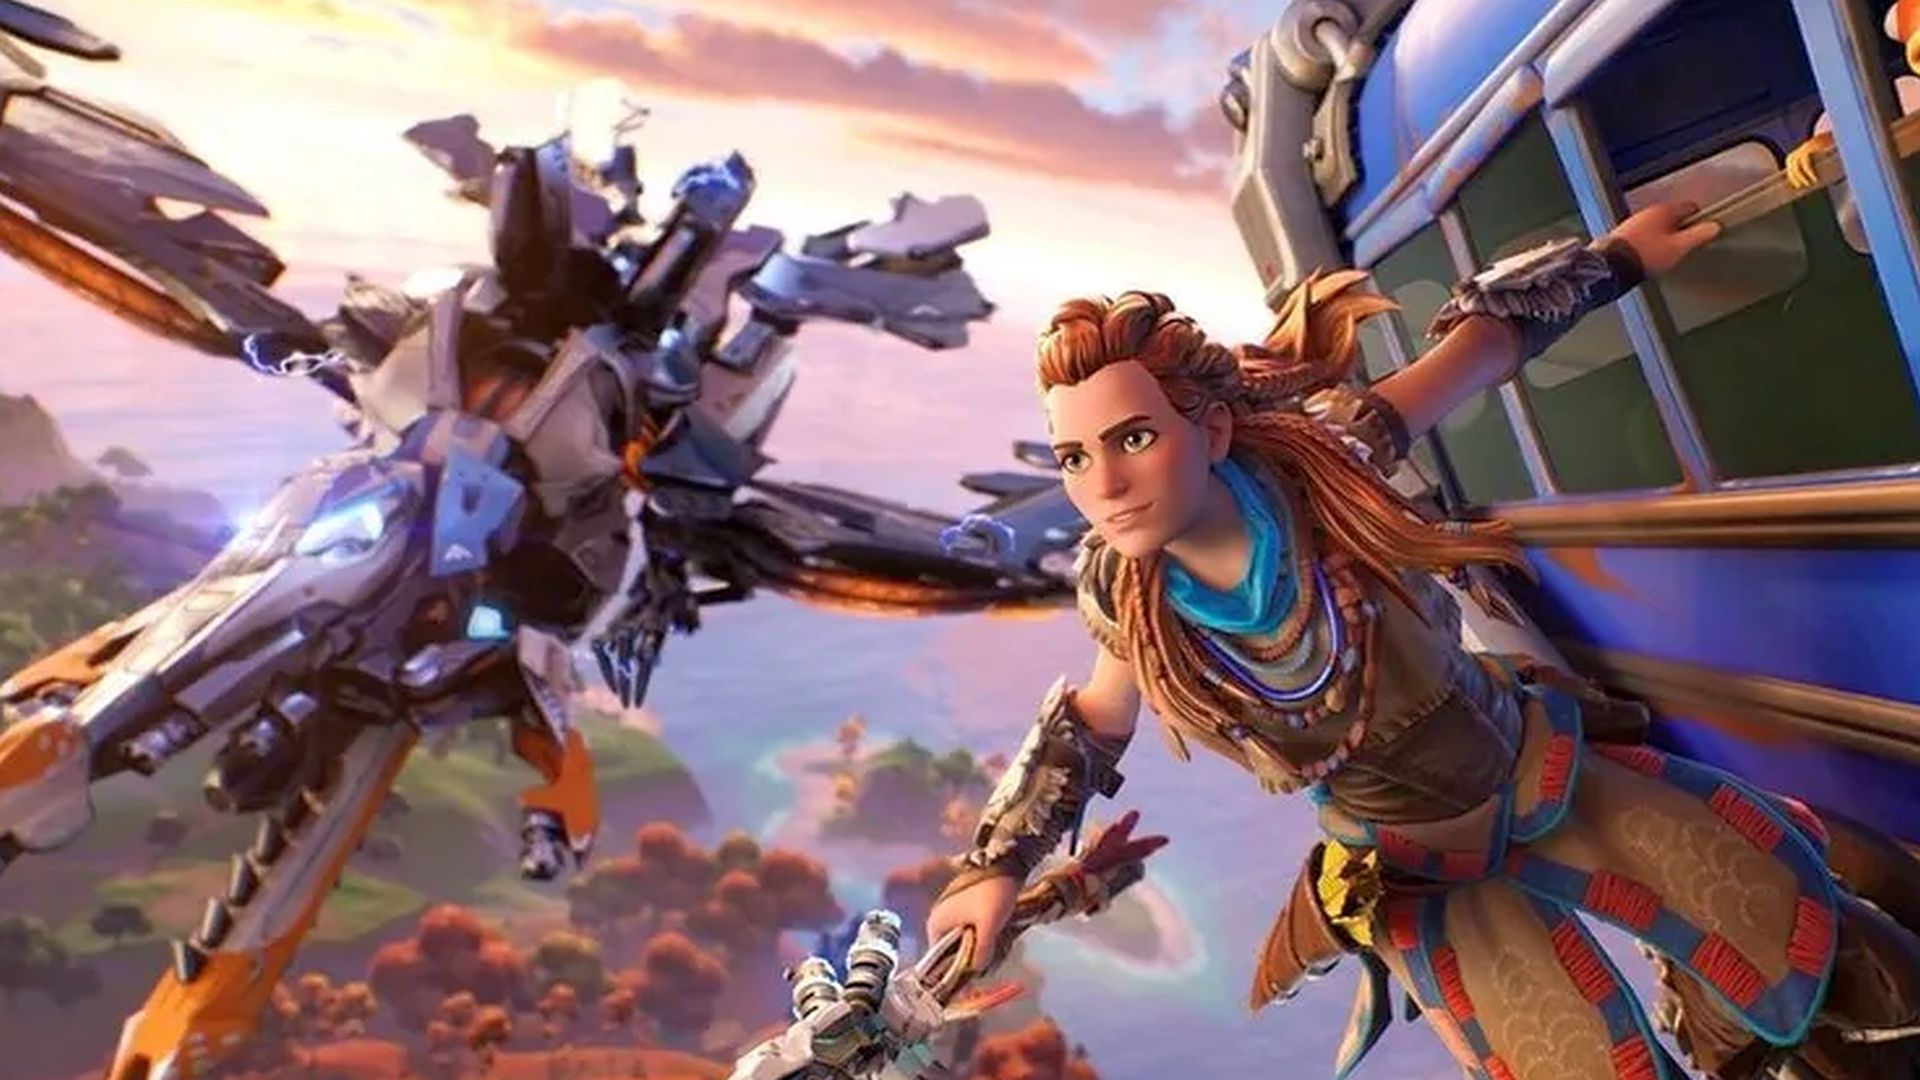 Fortnite Is Getting A Horizon Zero Dawn Aloy Skin And Limited Time Mode